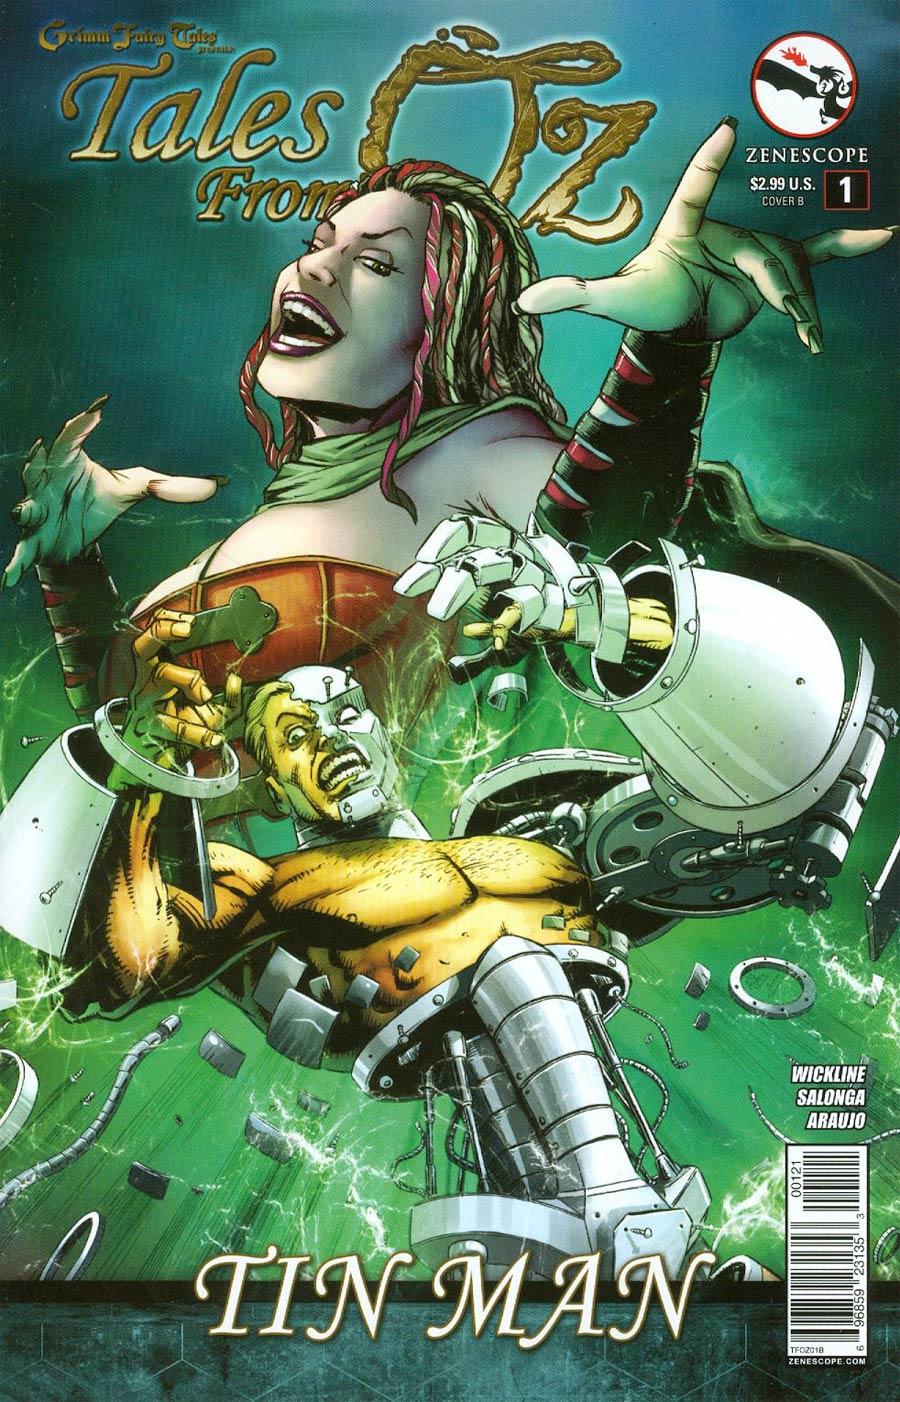 Grimm Fairy Tales Presents Tales From Oz #1 Tin Man Cover B Anthony Spay